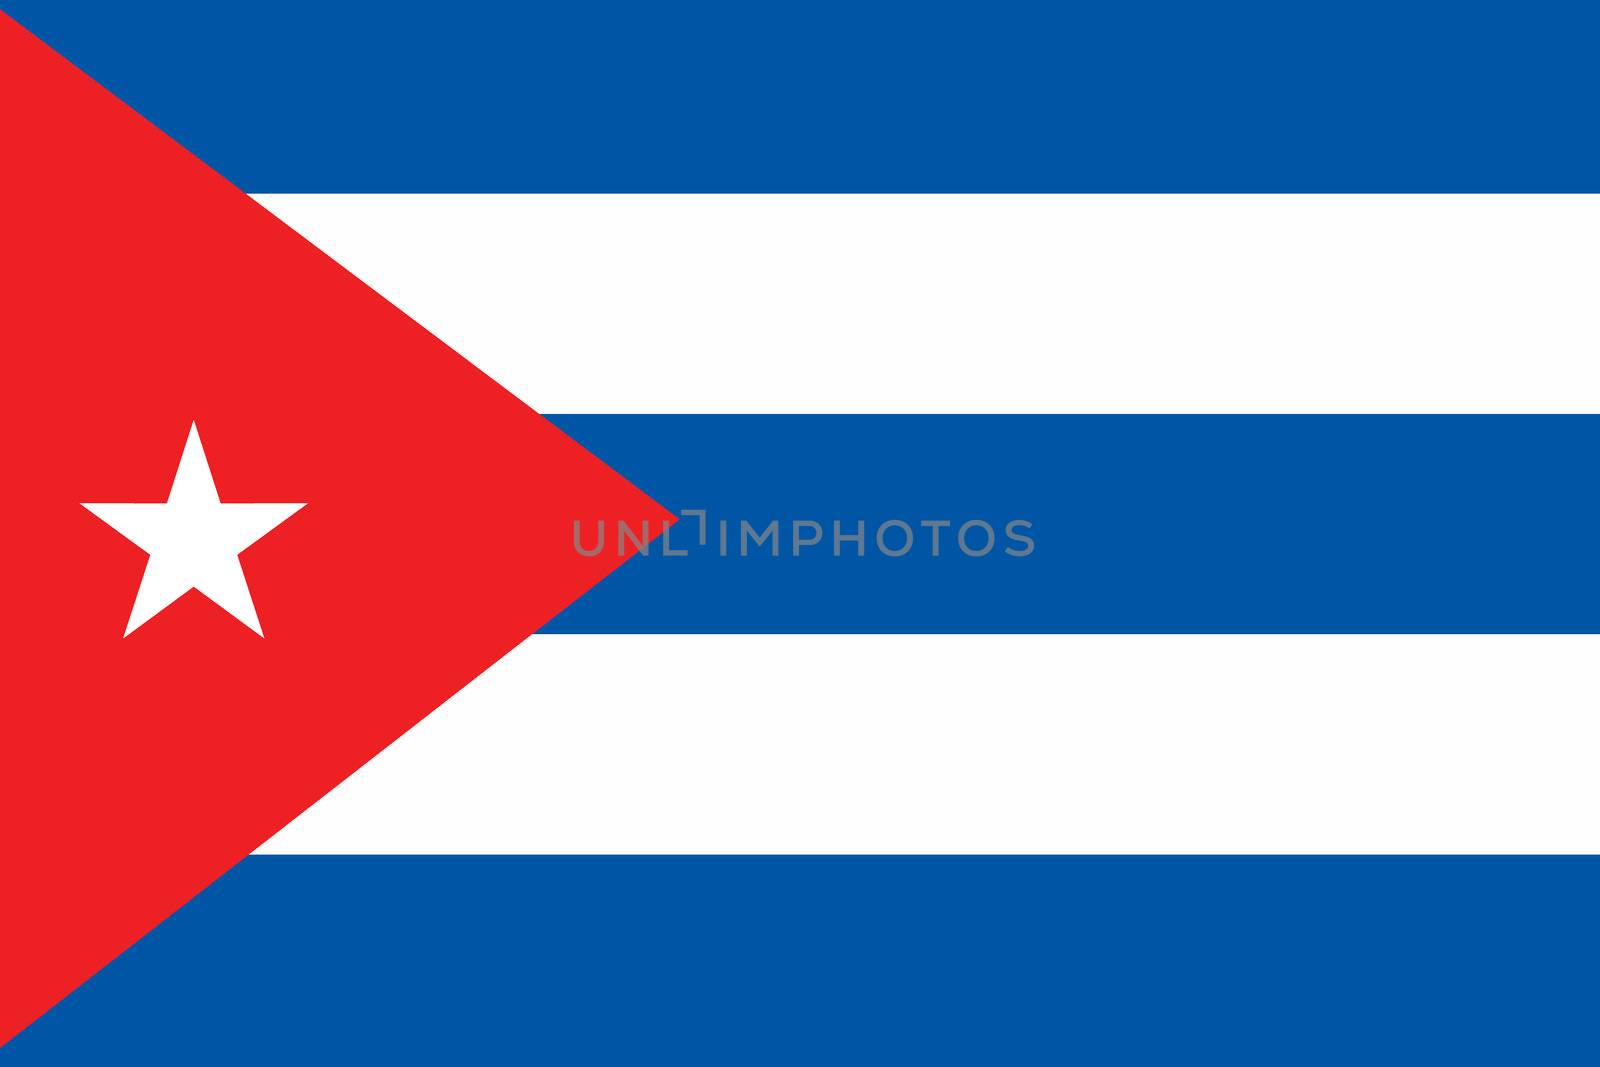 An Illustrated Drawing of the flag of Cuba